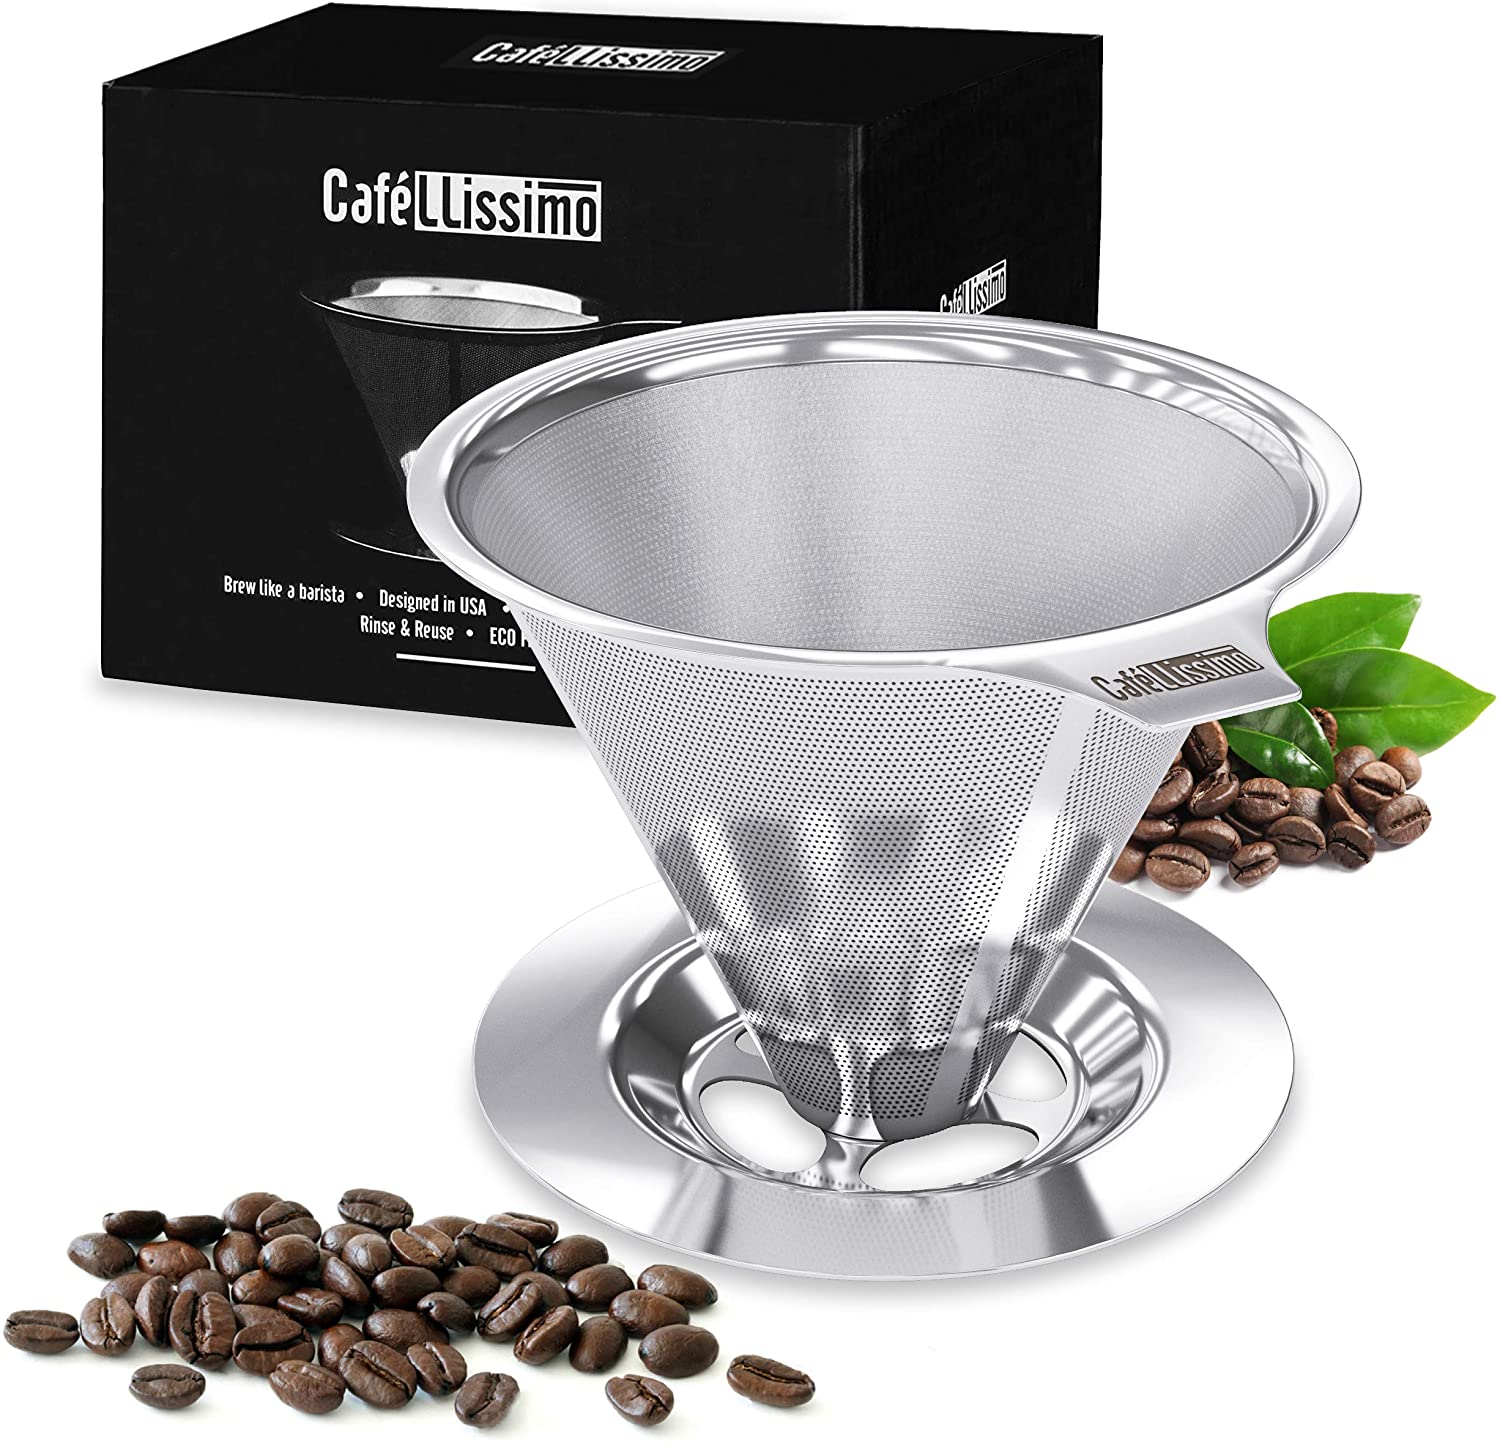 https://www.dontwasteyourmoney.com/wp-content/uploads/2019/08/cafellissimo-paperless-pour-over-coffee-maker-single-serve.jpg